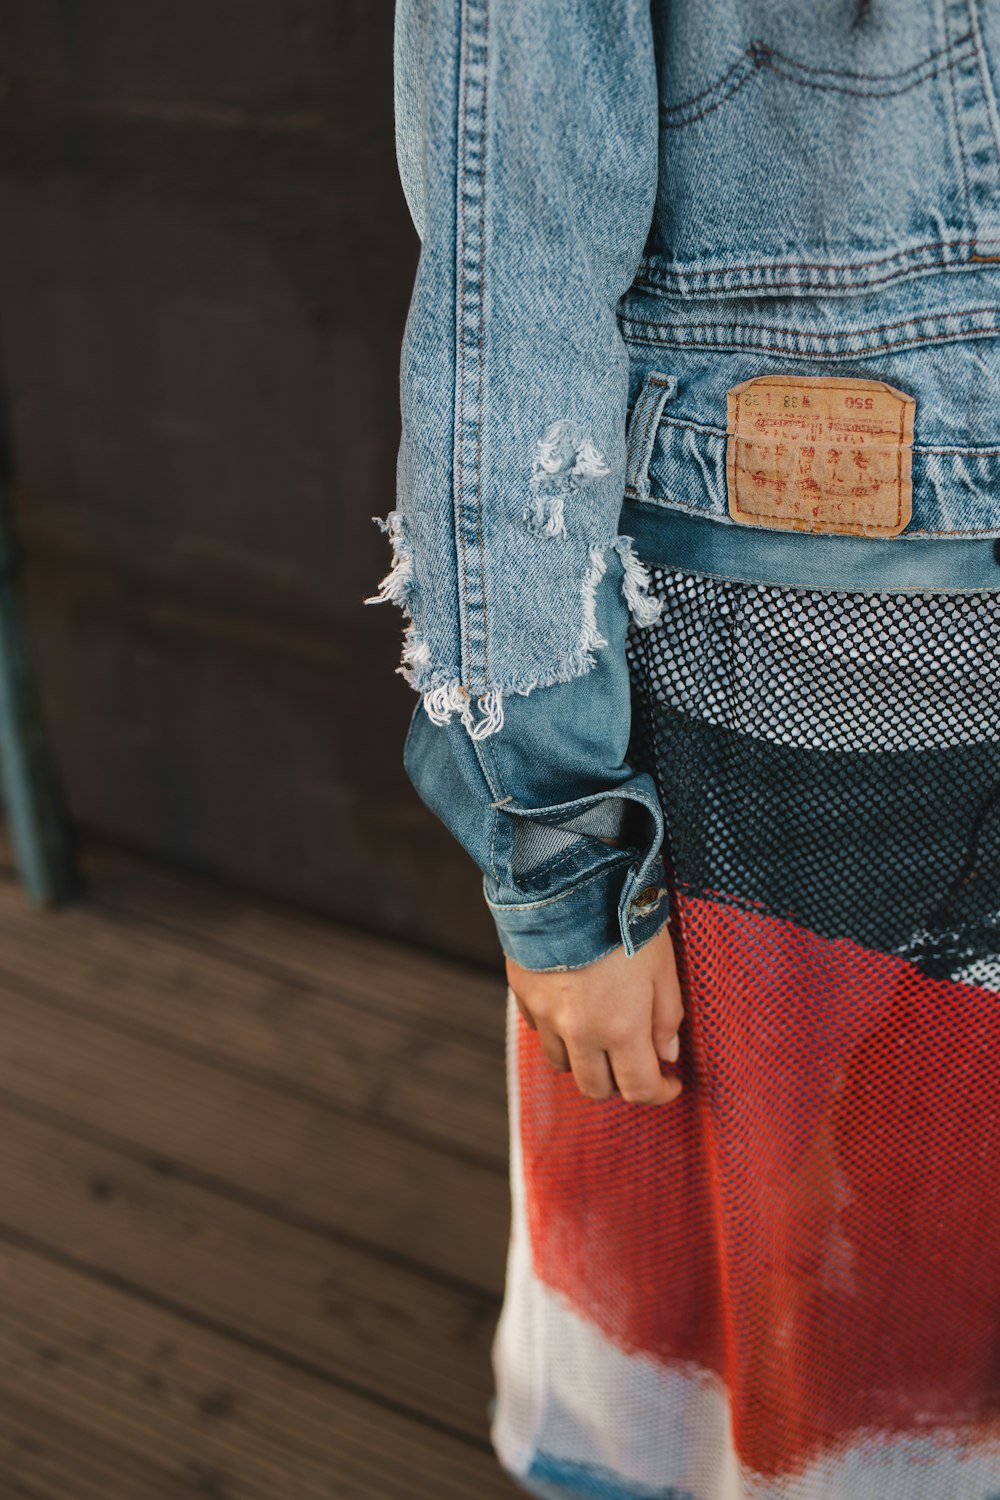 a person wearing a jean jacket with a patch on it